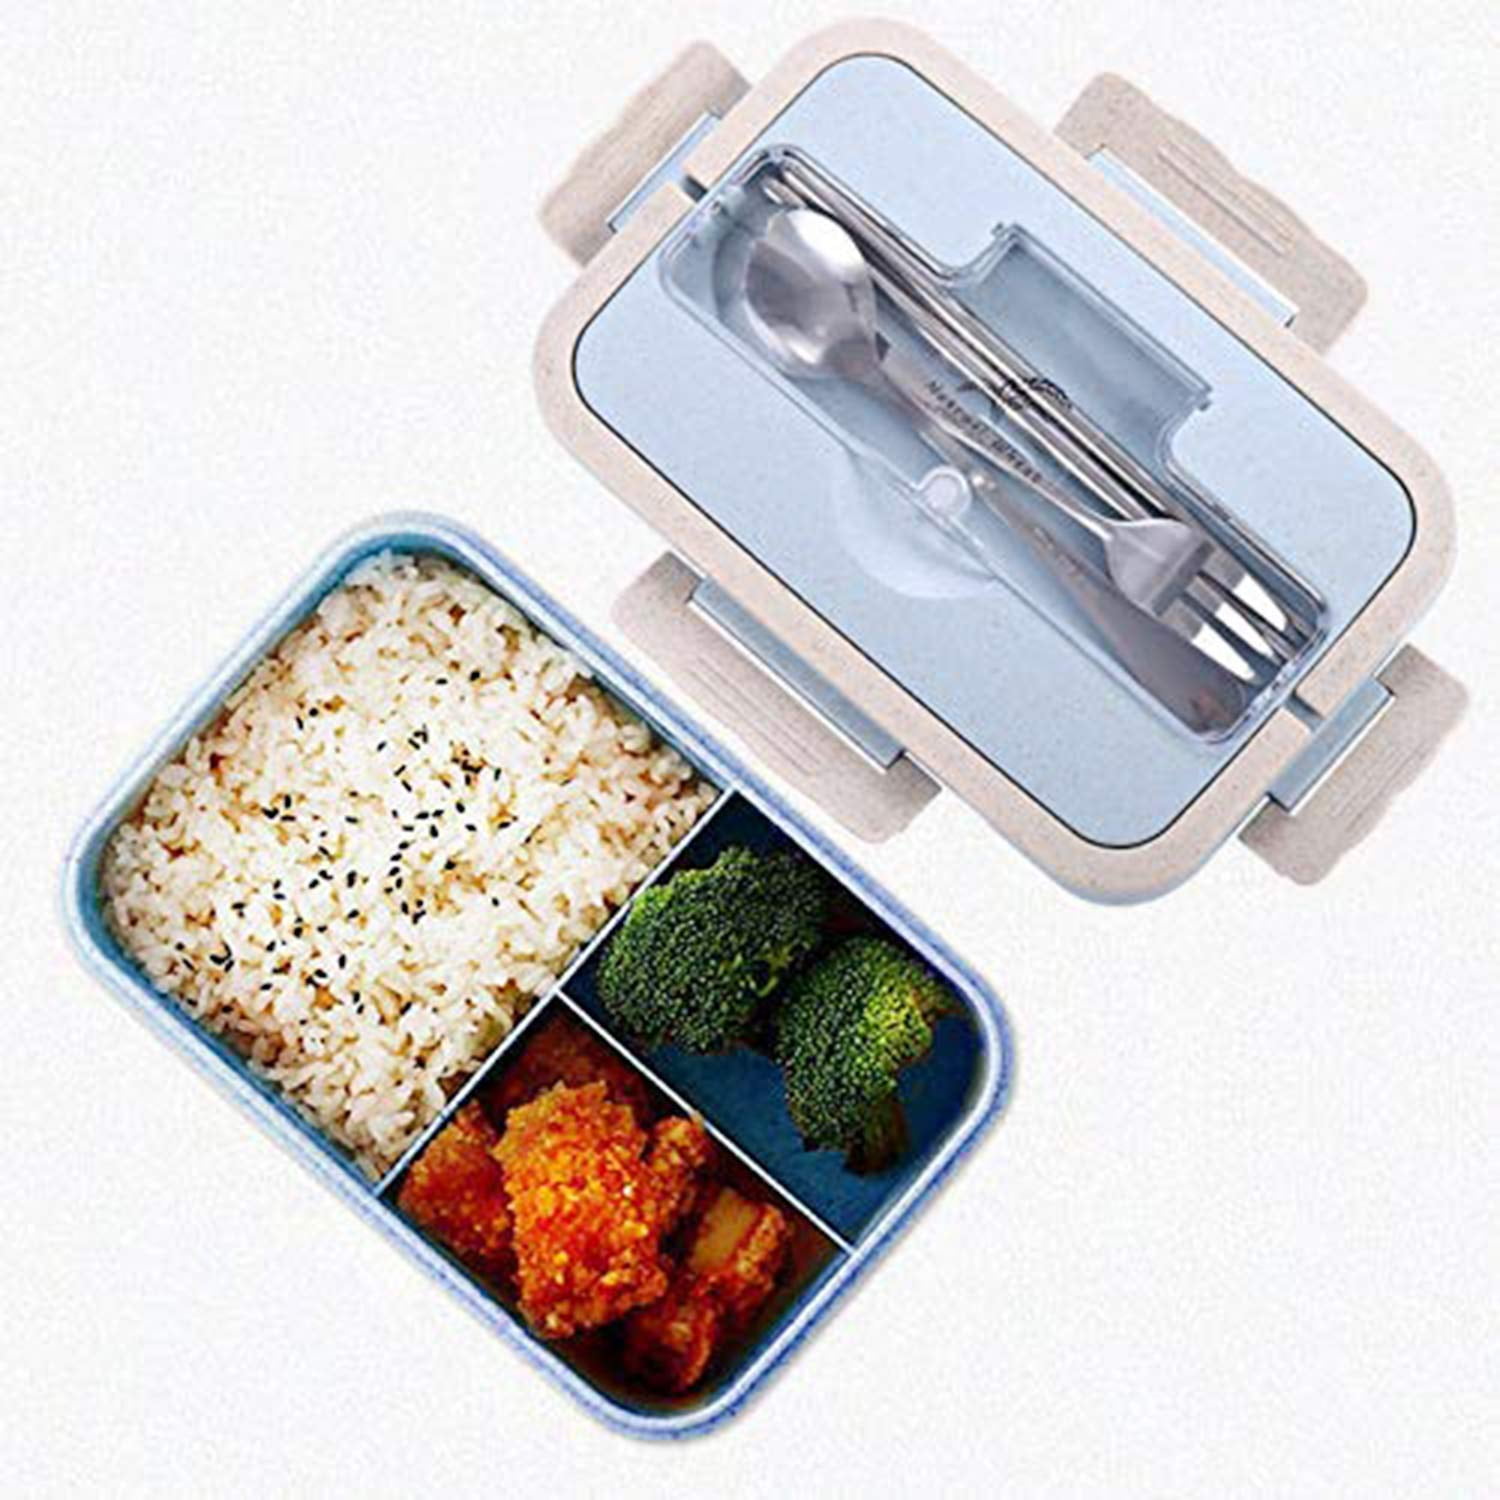 SunAurora Bento Lunch Box,Natural Wheat Lunch Box,Leakproof Bento Box with Handle and Tableware,1000 ML Blue 